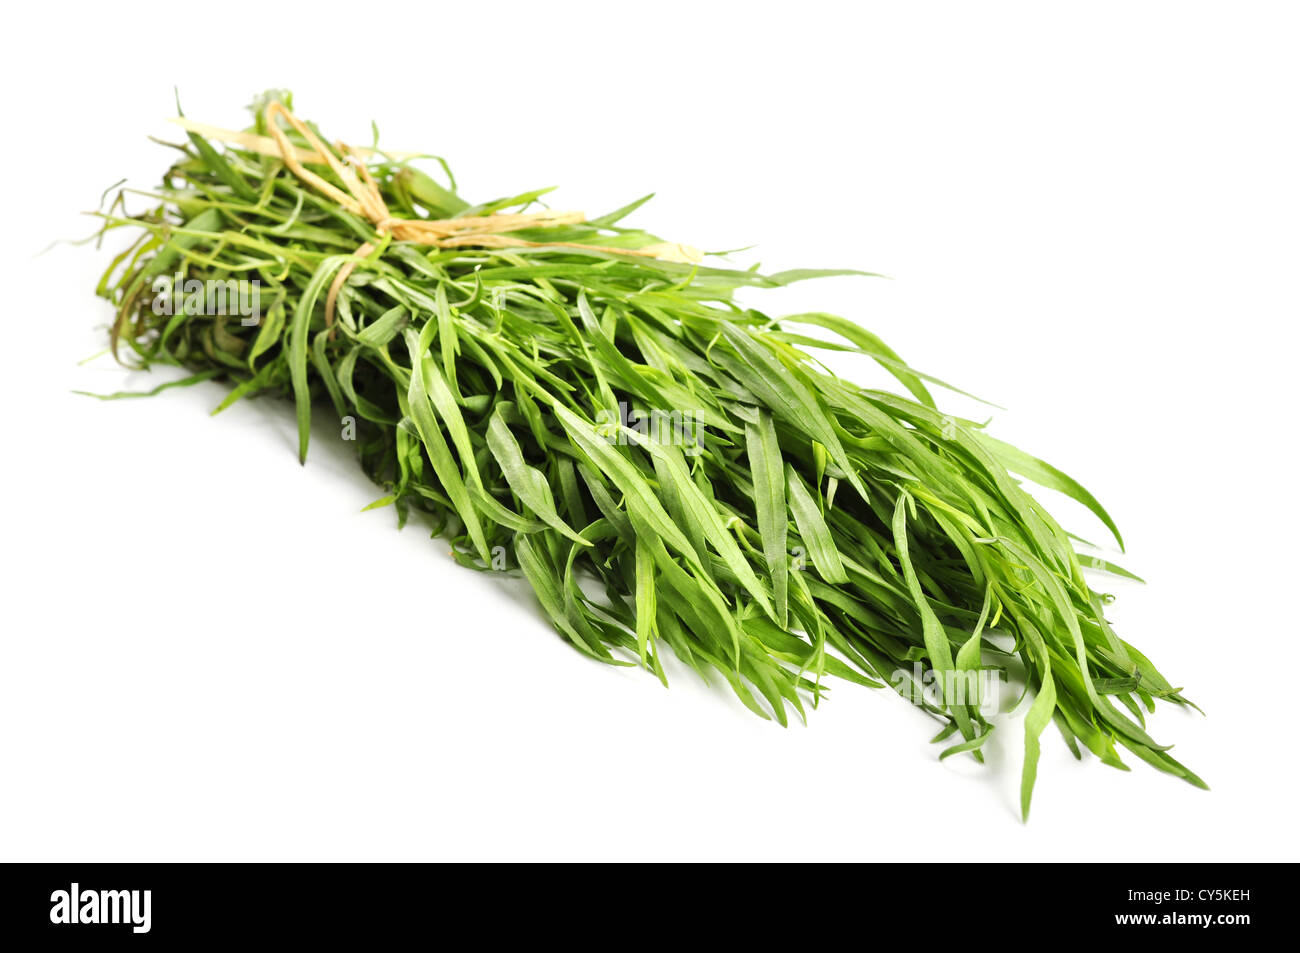 Fresh tarragon herb bunch isolated on white background Stock Photo - Alamy